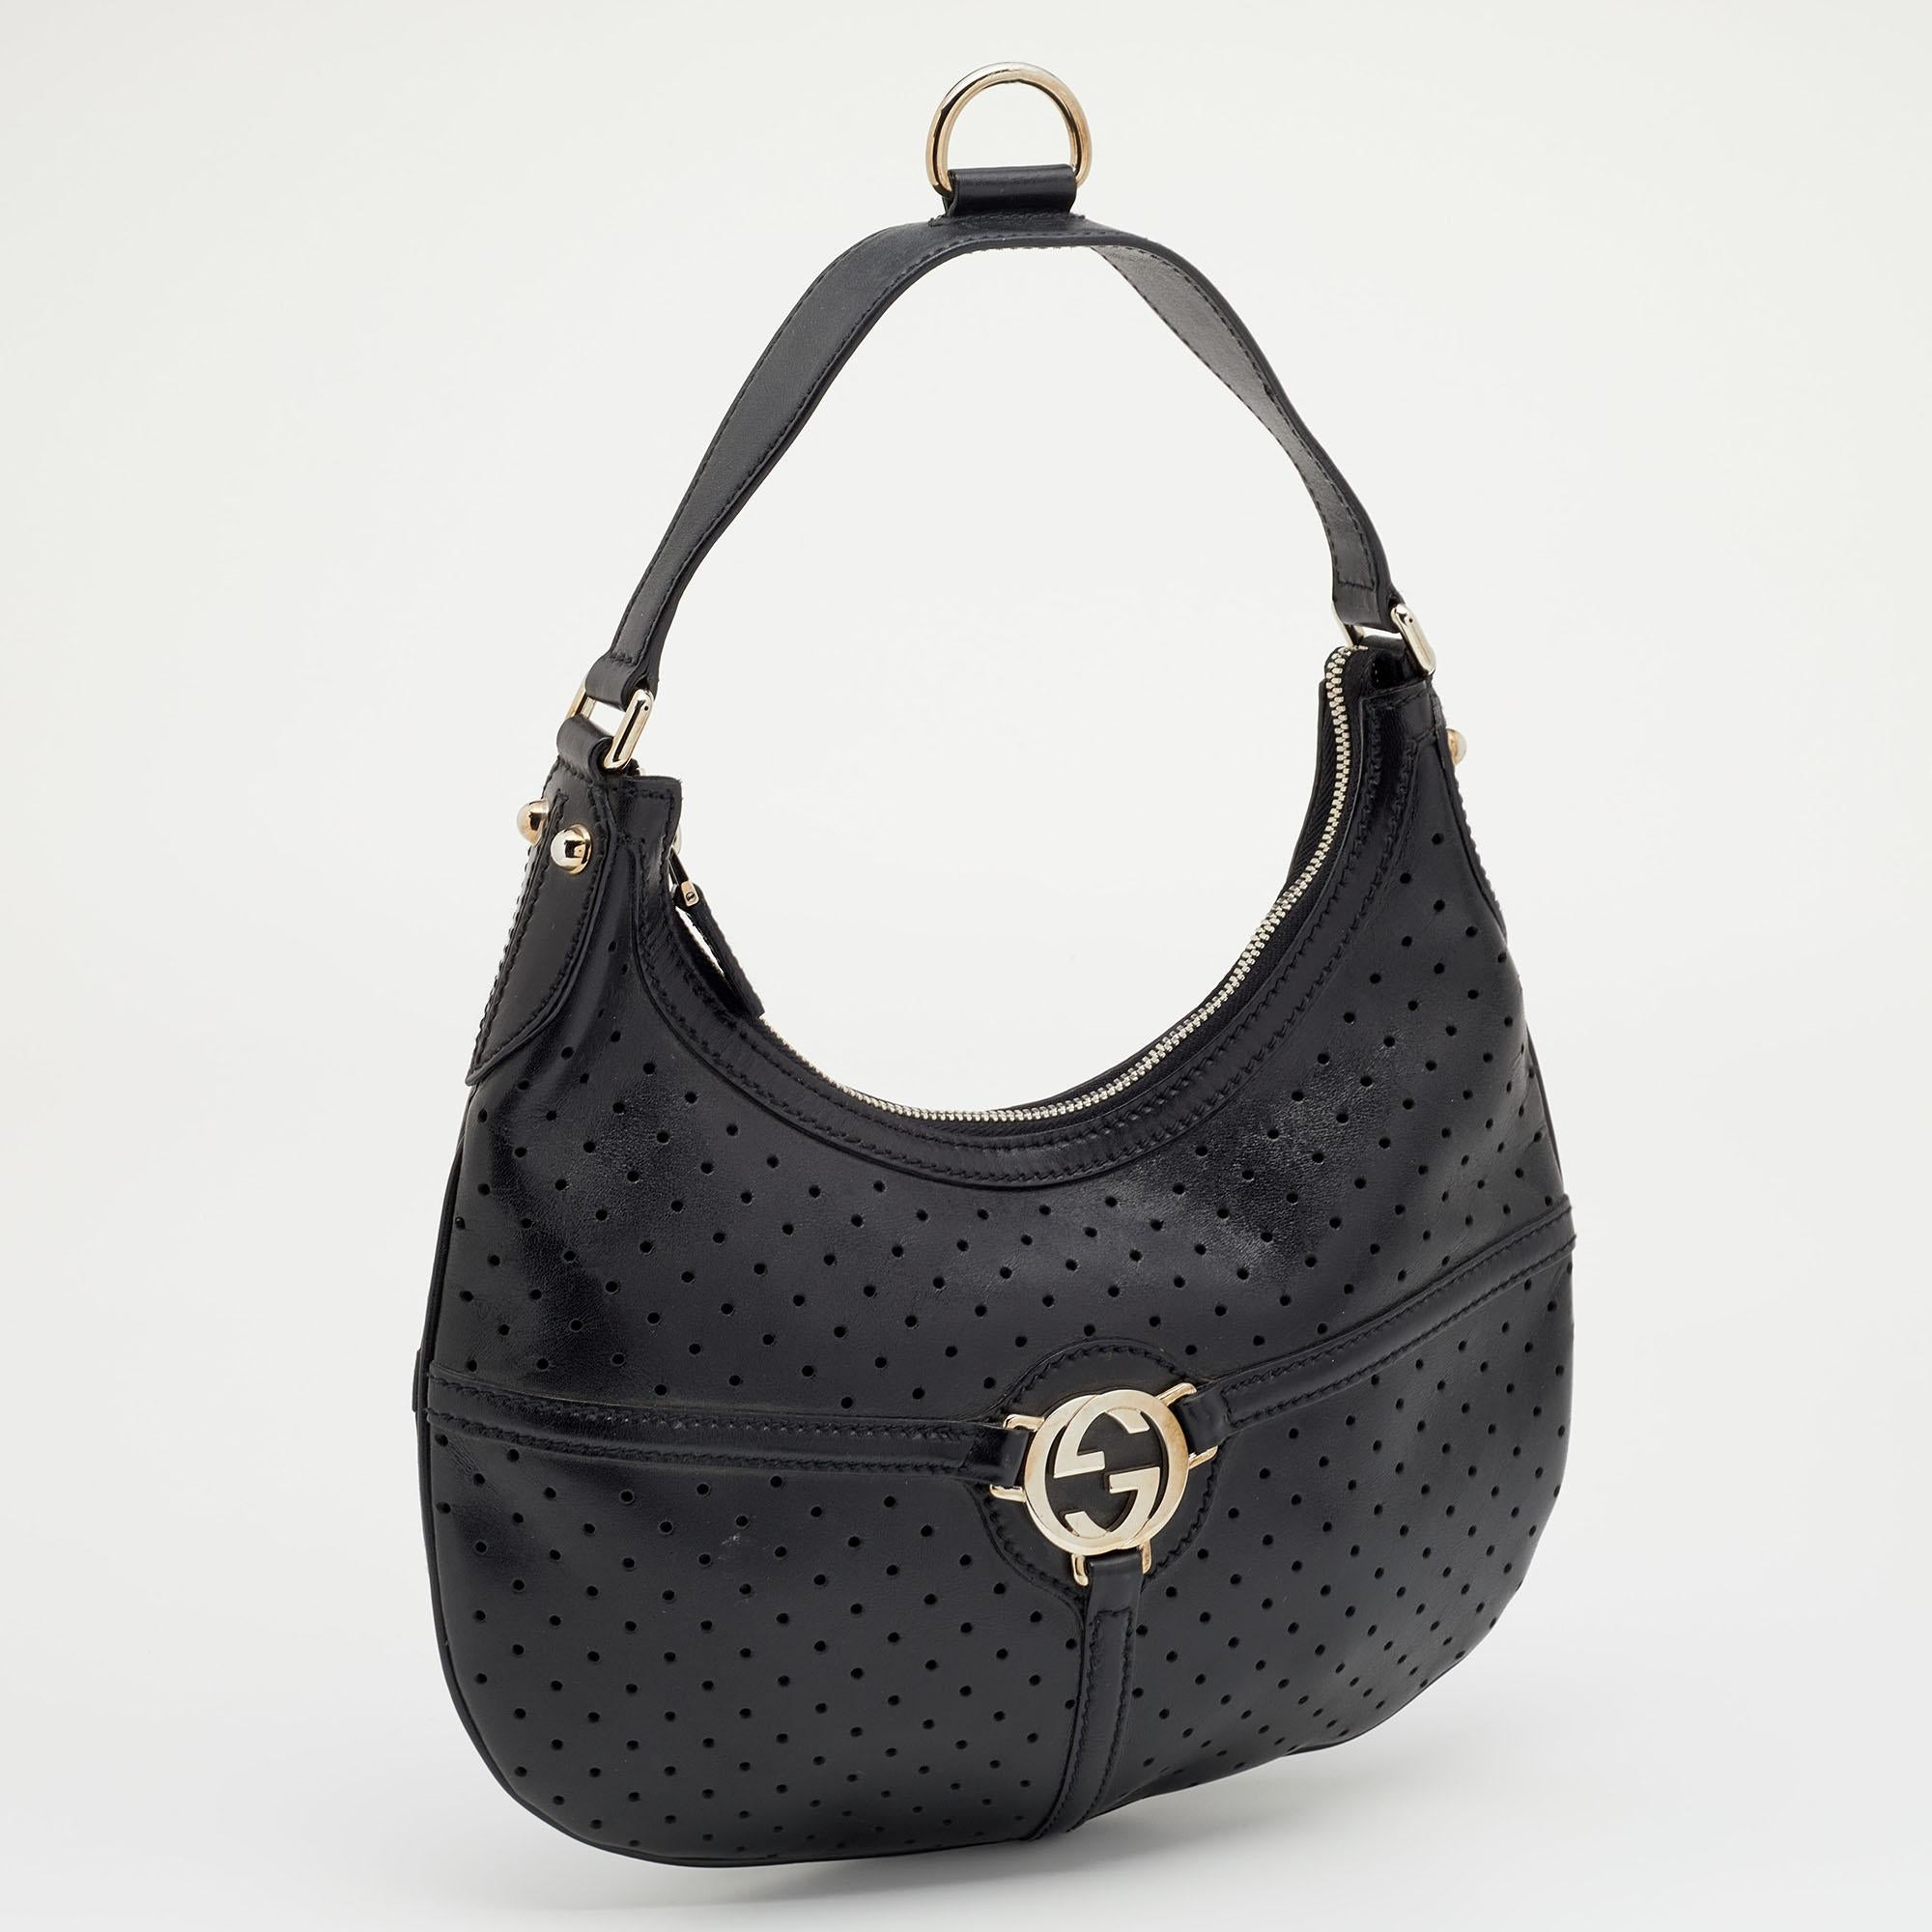 Women's Gucci Black Perforated Leather Reins Hobo